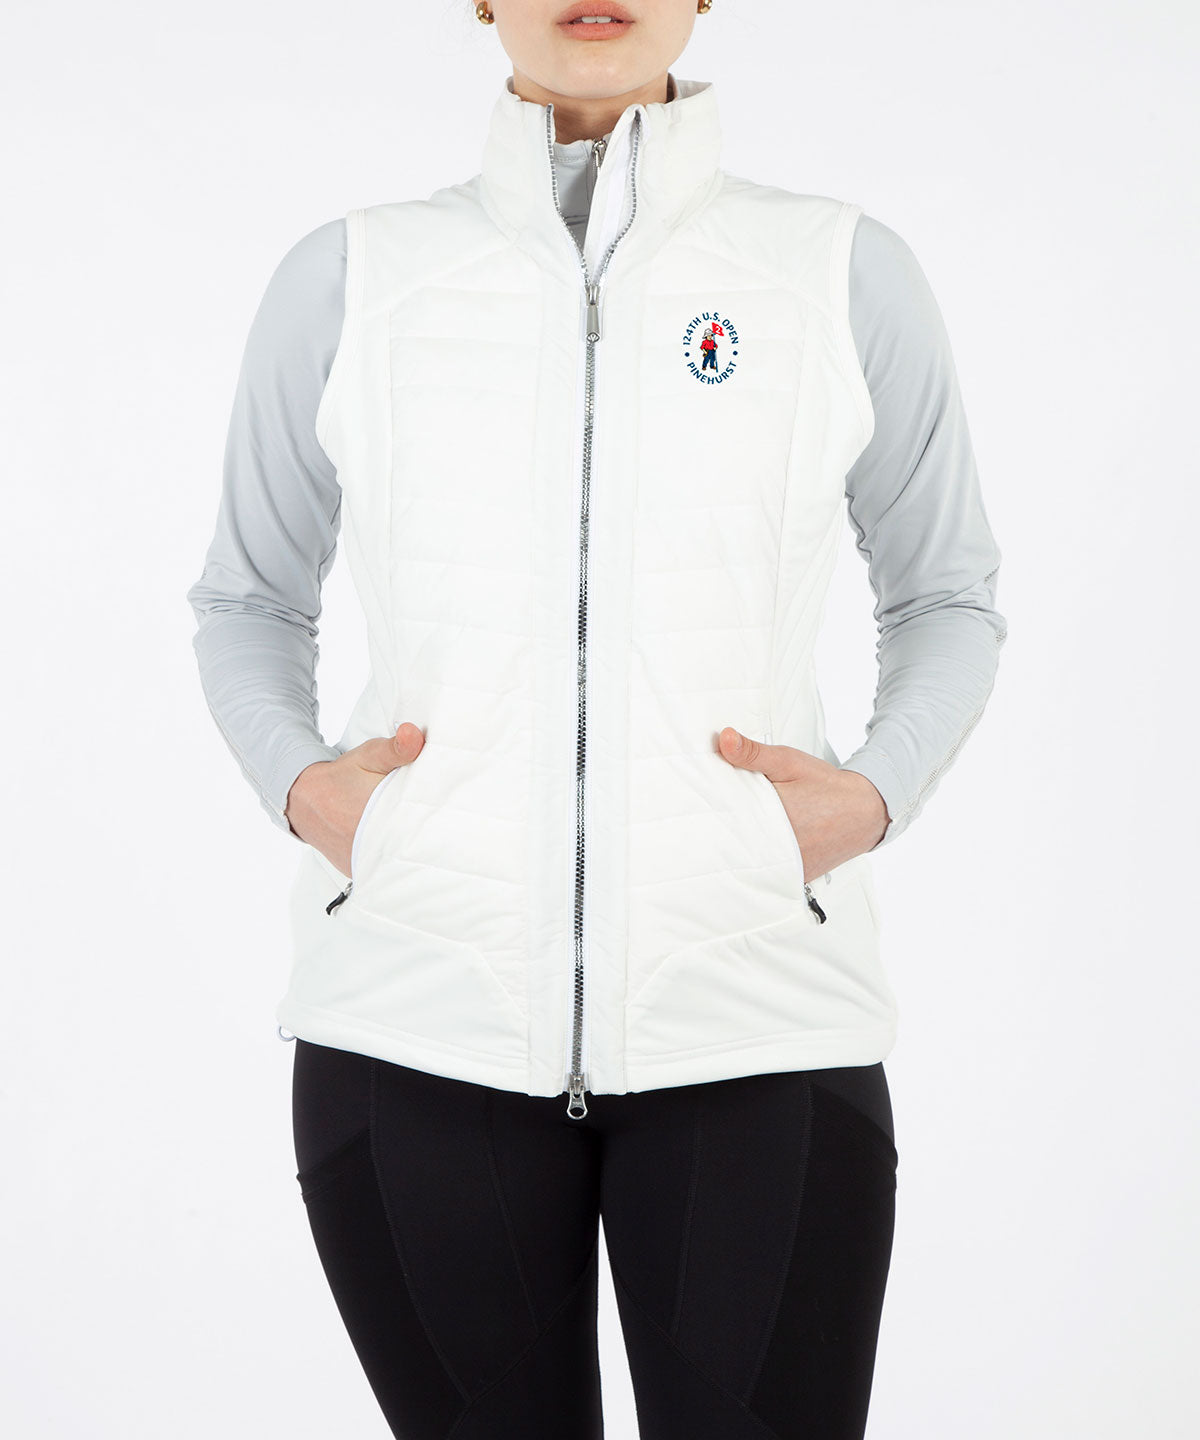 124th U.S. Open Sunice Women's Lizzie Quilted Thermal Vest